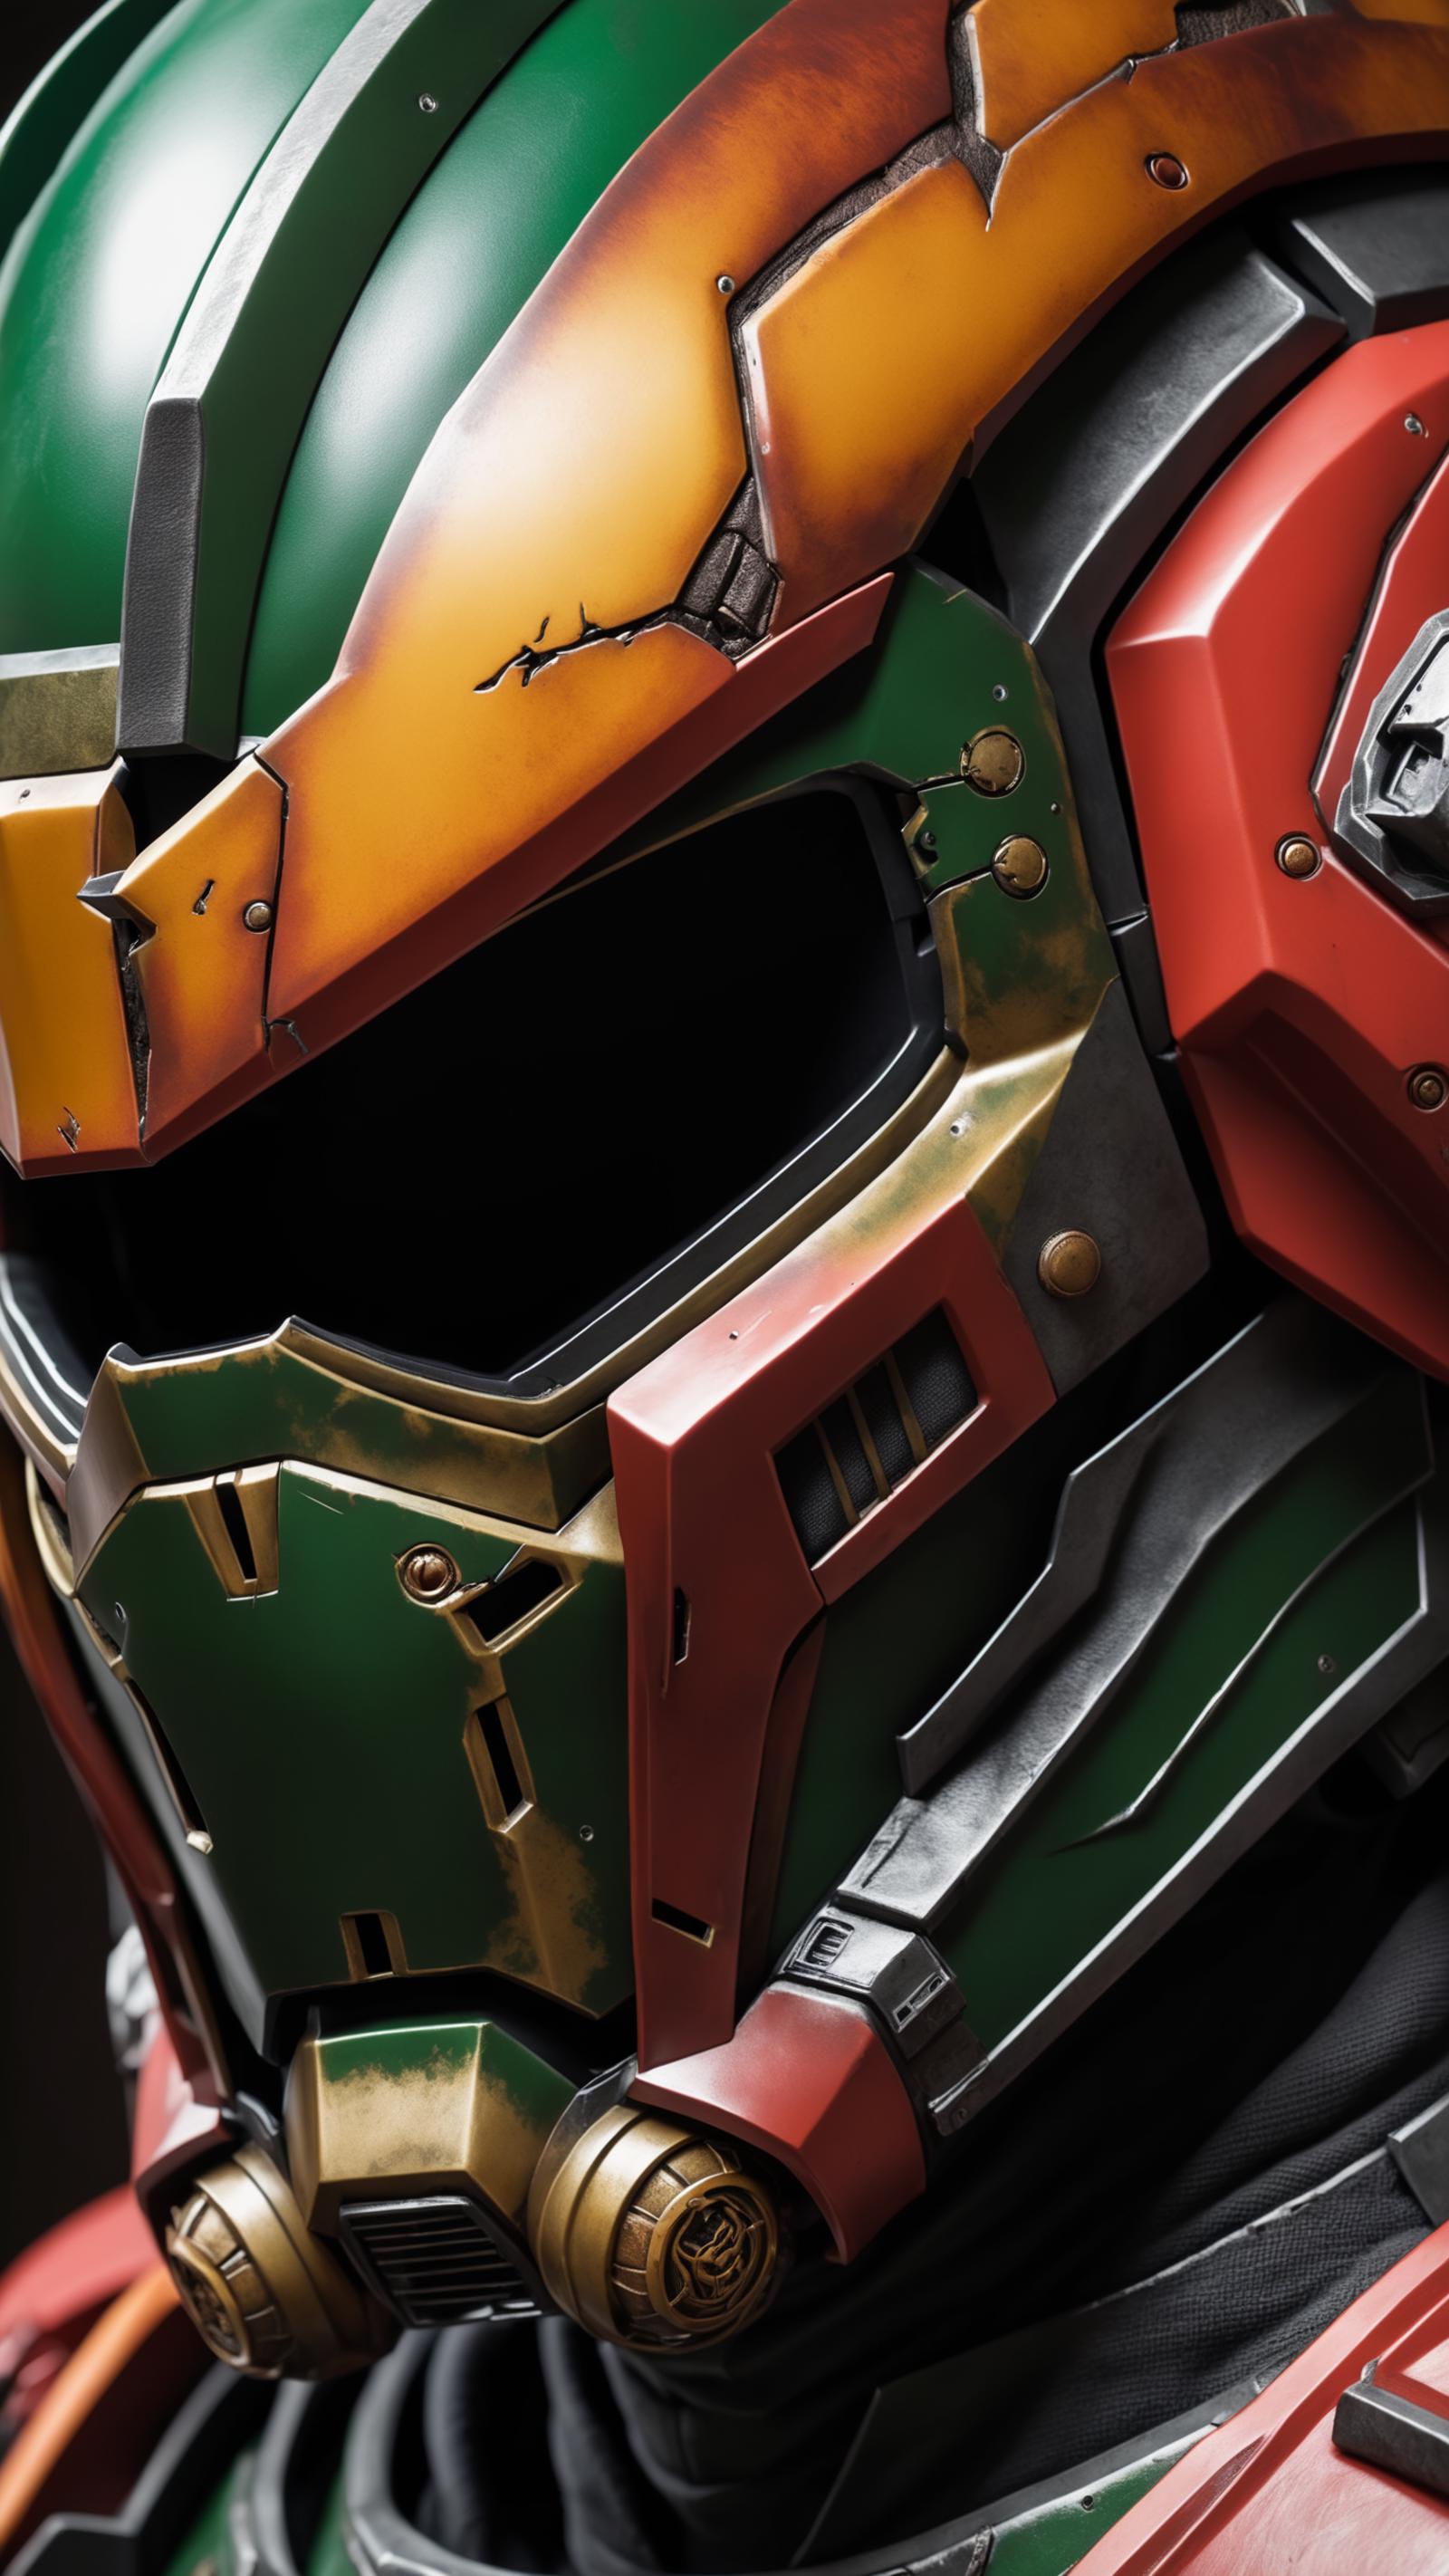 A closeup of a futuristic green and red helmet with a visor.